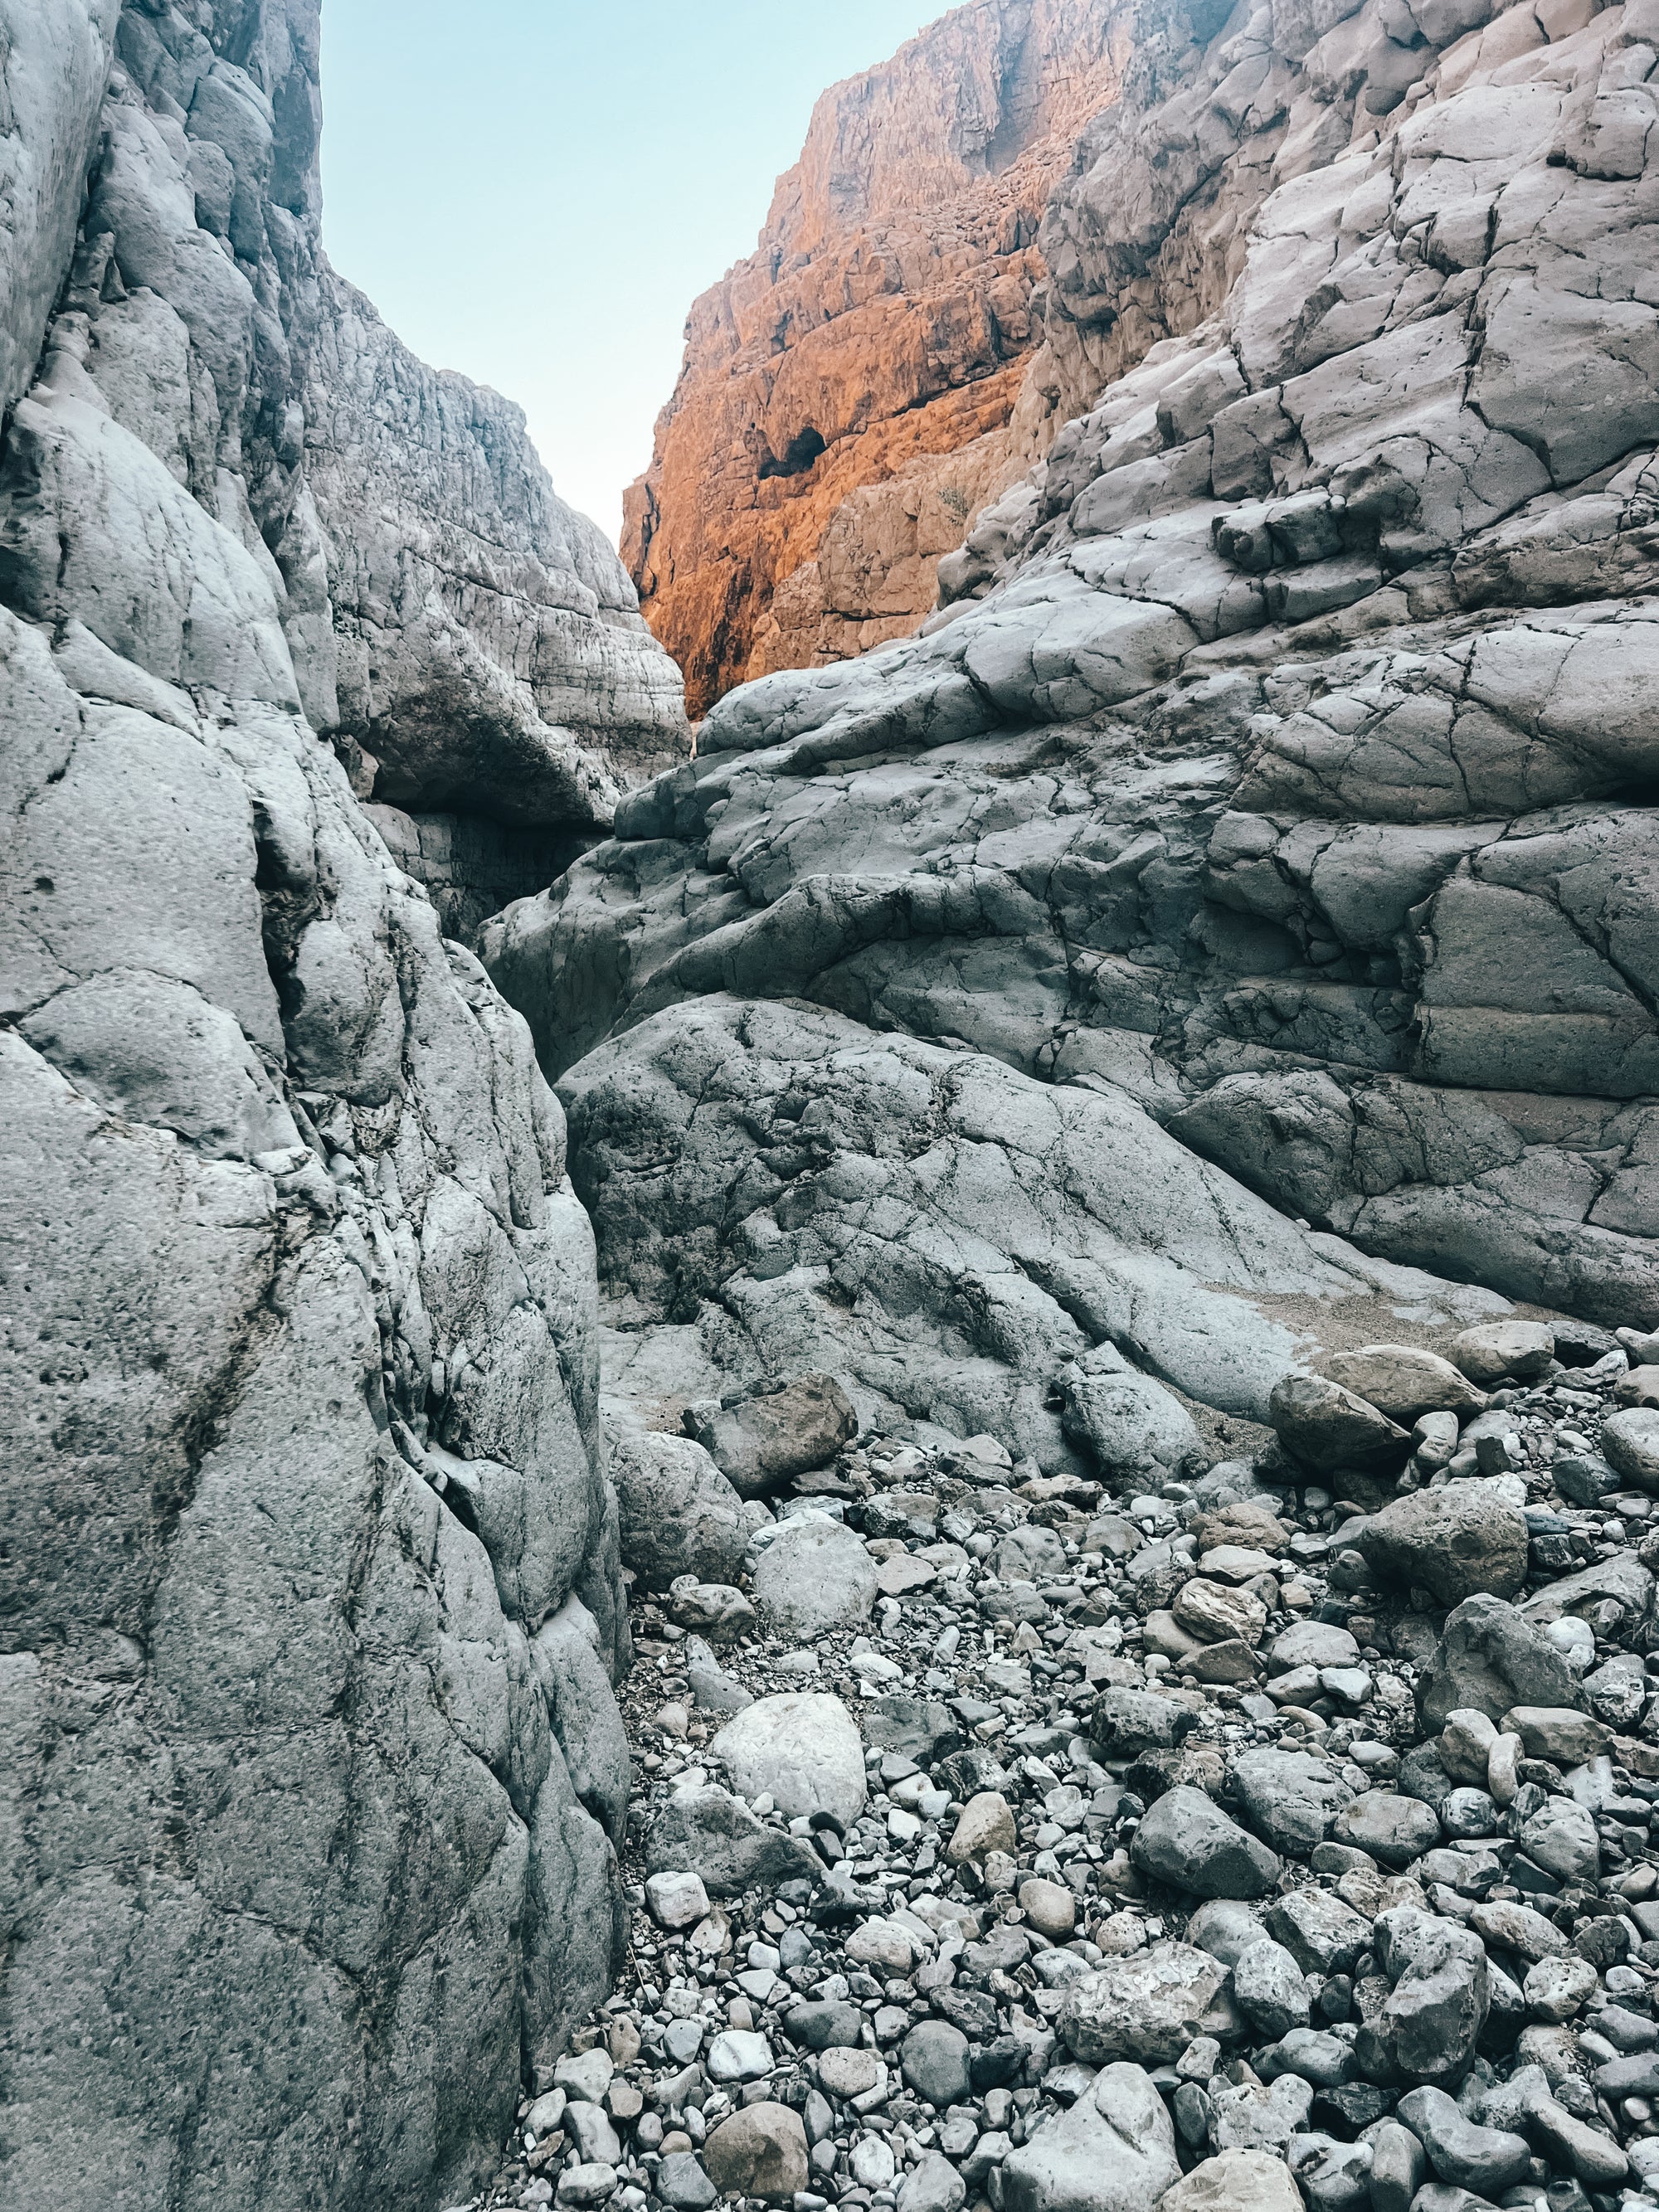 Rappelling in Nahal Rahaf - an oasis